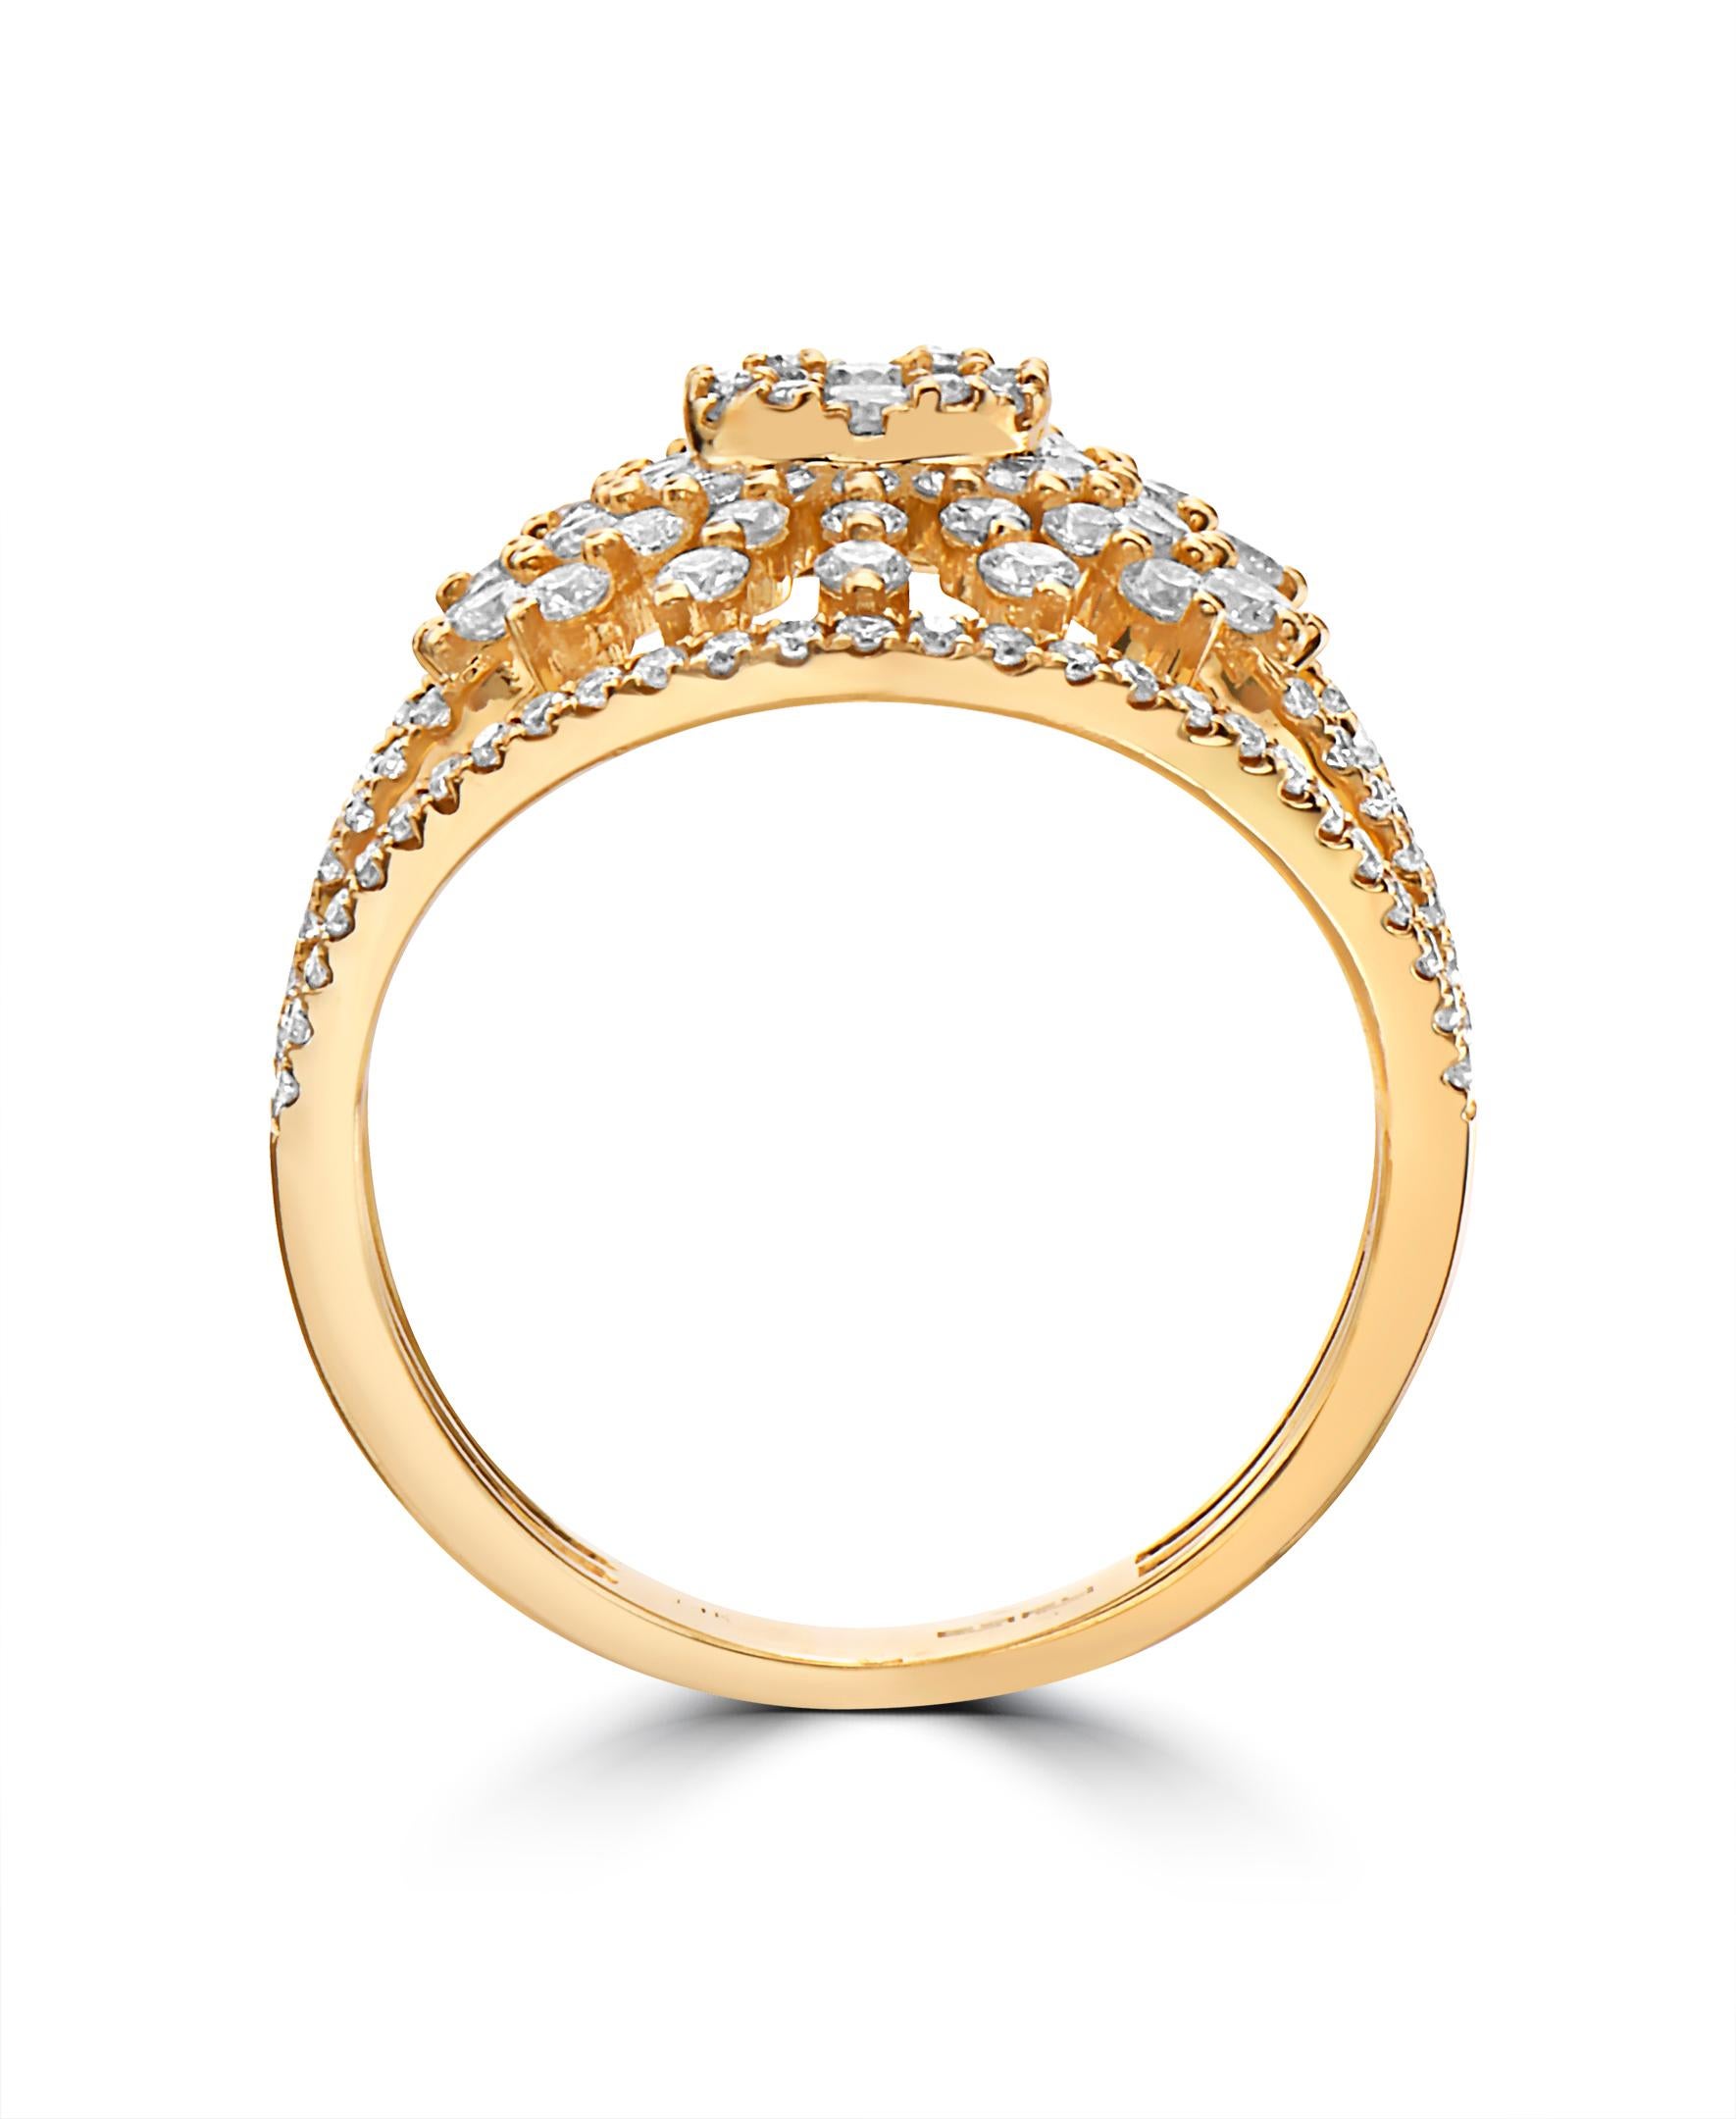 Effy ring in 14K Yellow gold, with a diamond starburst design.

Total diamond weight is 1.09ct.

Item number CY77.

  